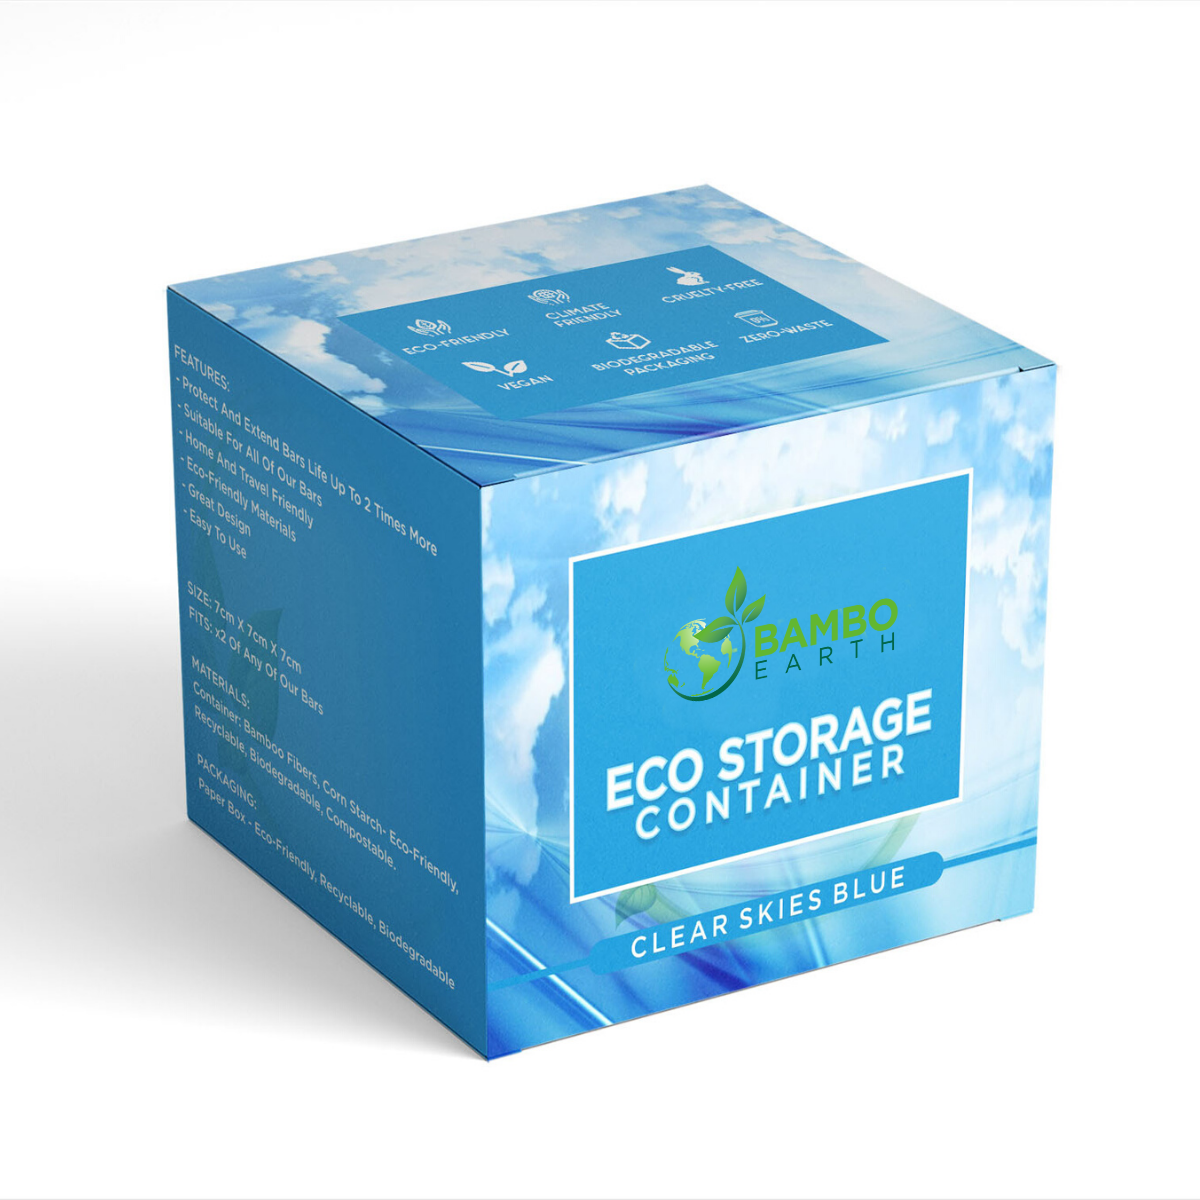 ECO Storage Container - Clear Skies Blue